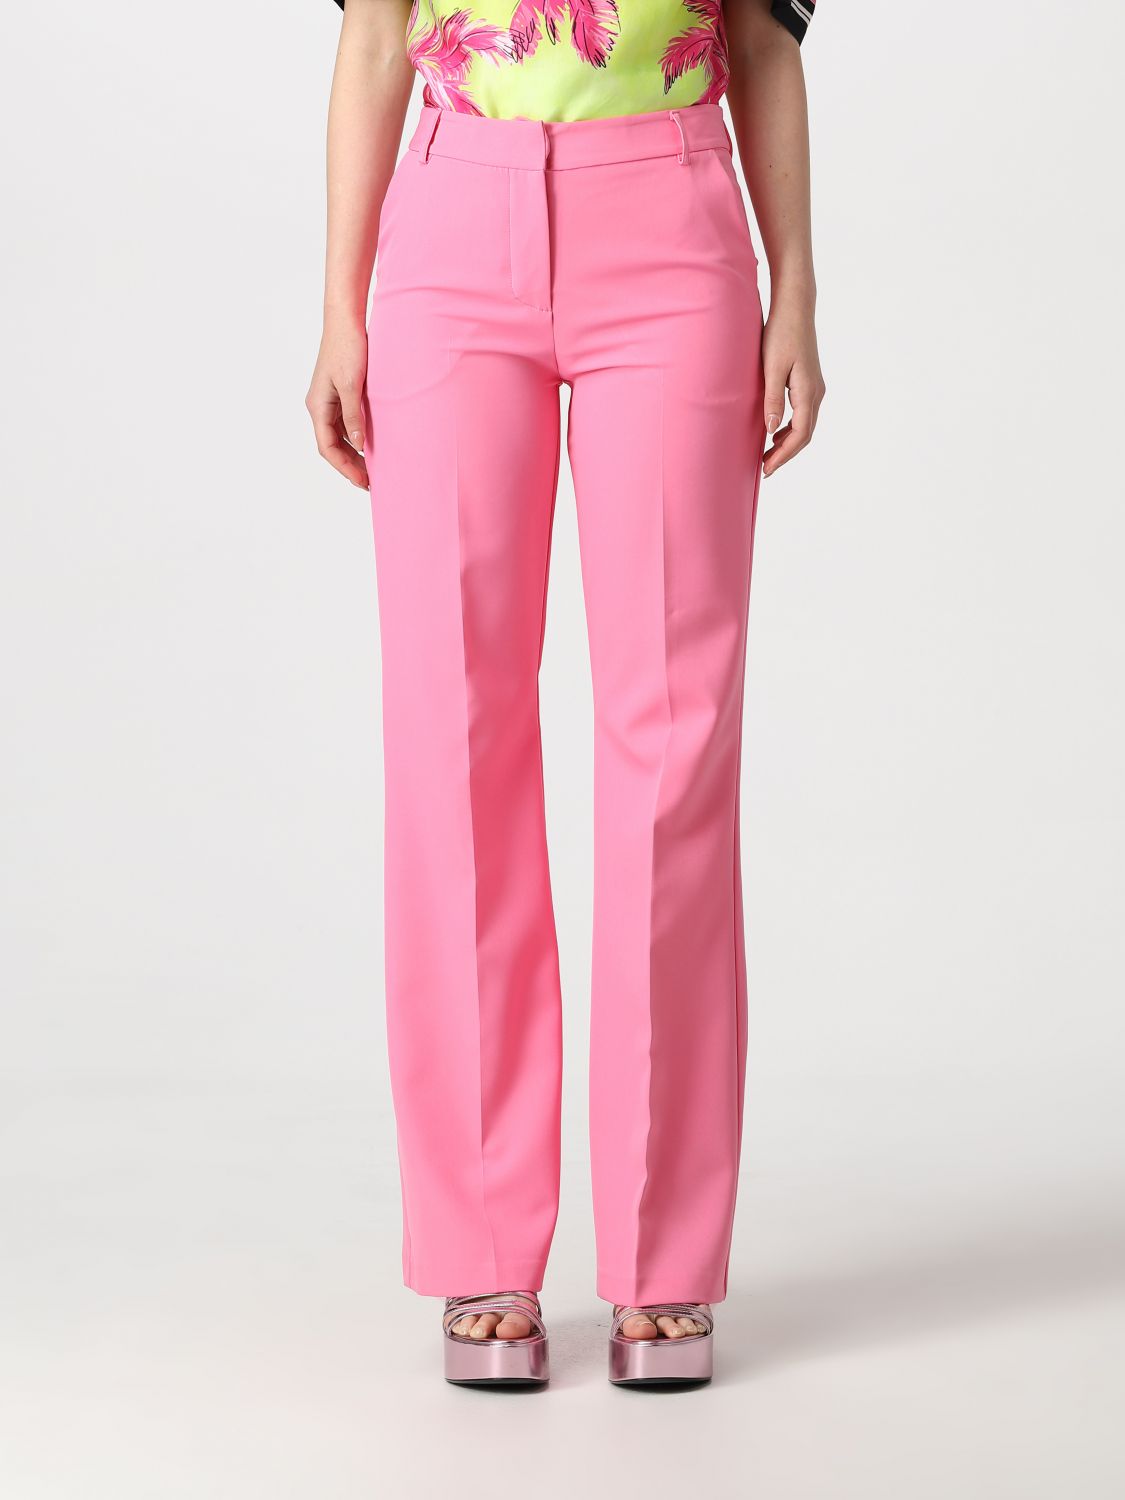 ERMANNO FIRENZE PANTS ERMANNO FIRENZE WOMAN COLOR PINK,E30252010